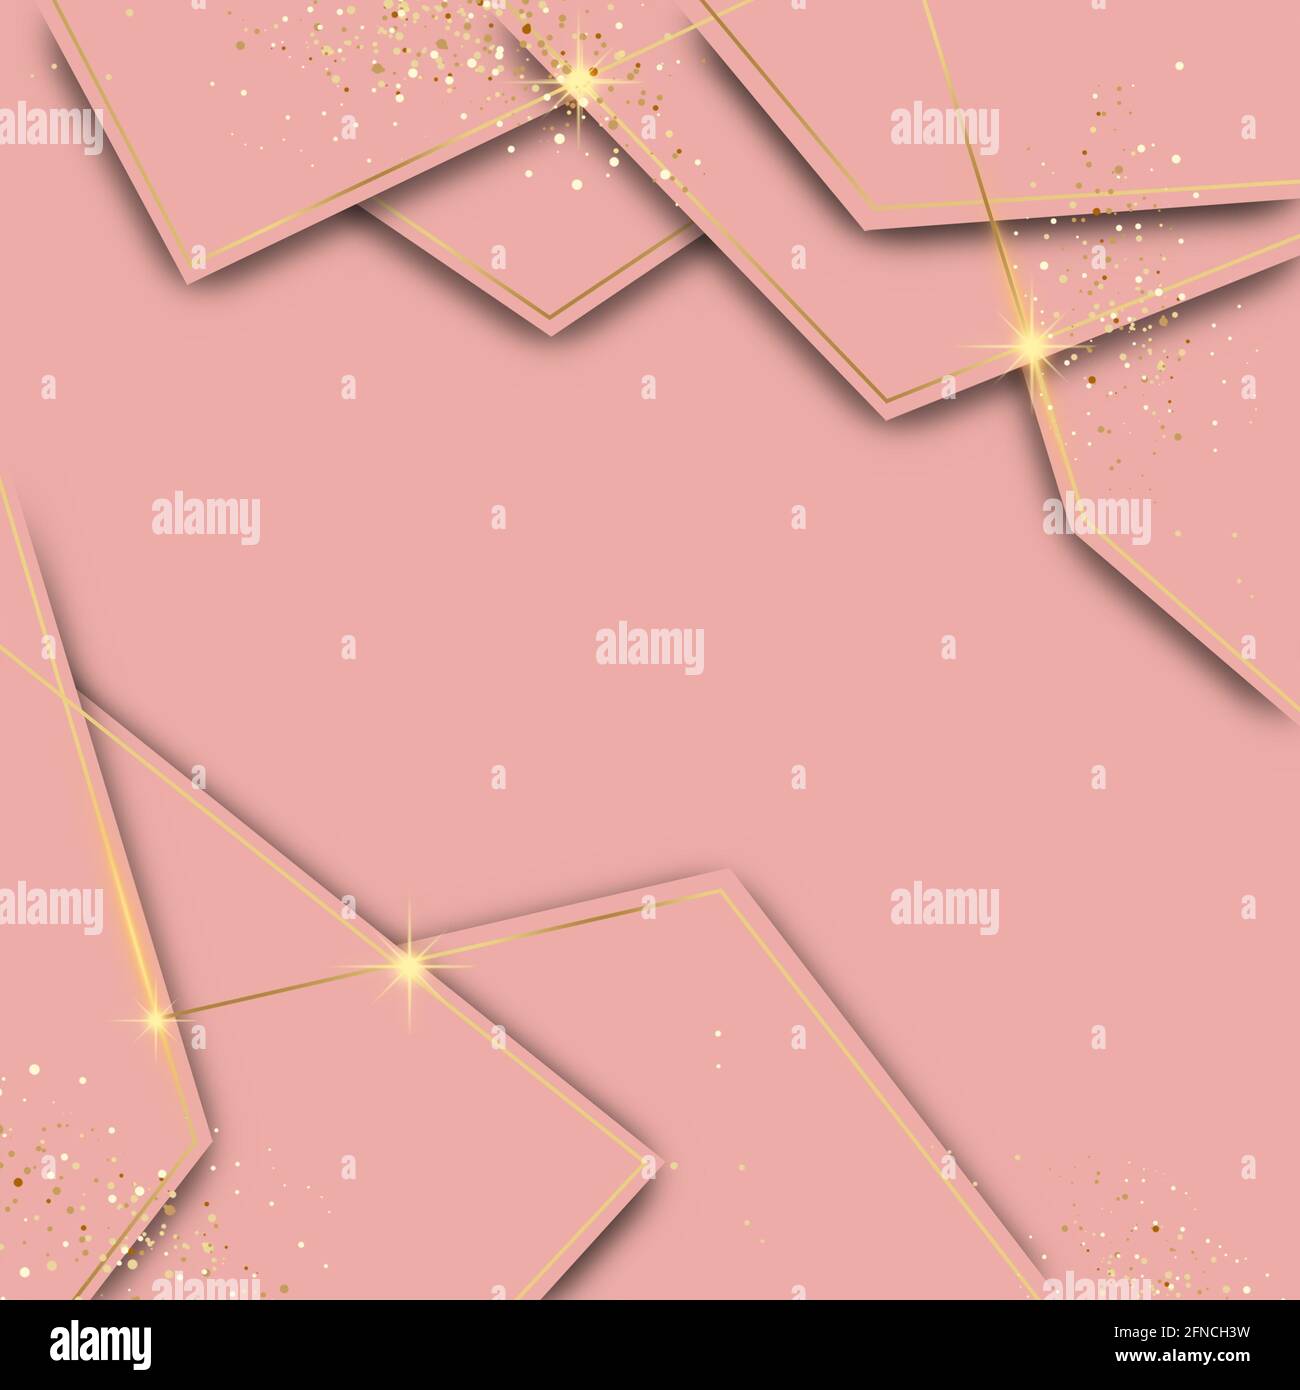 Abstract pink stylish beauty background with gold glitter shimmer and geometric shapes and copy space. Illustration. Stock Photo